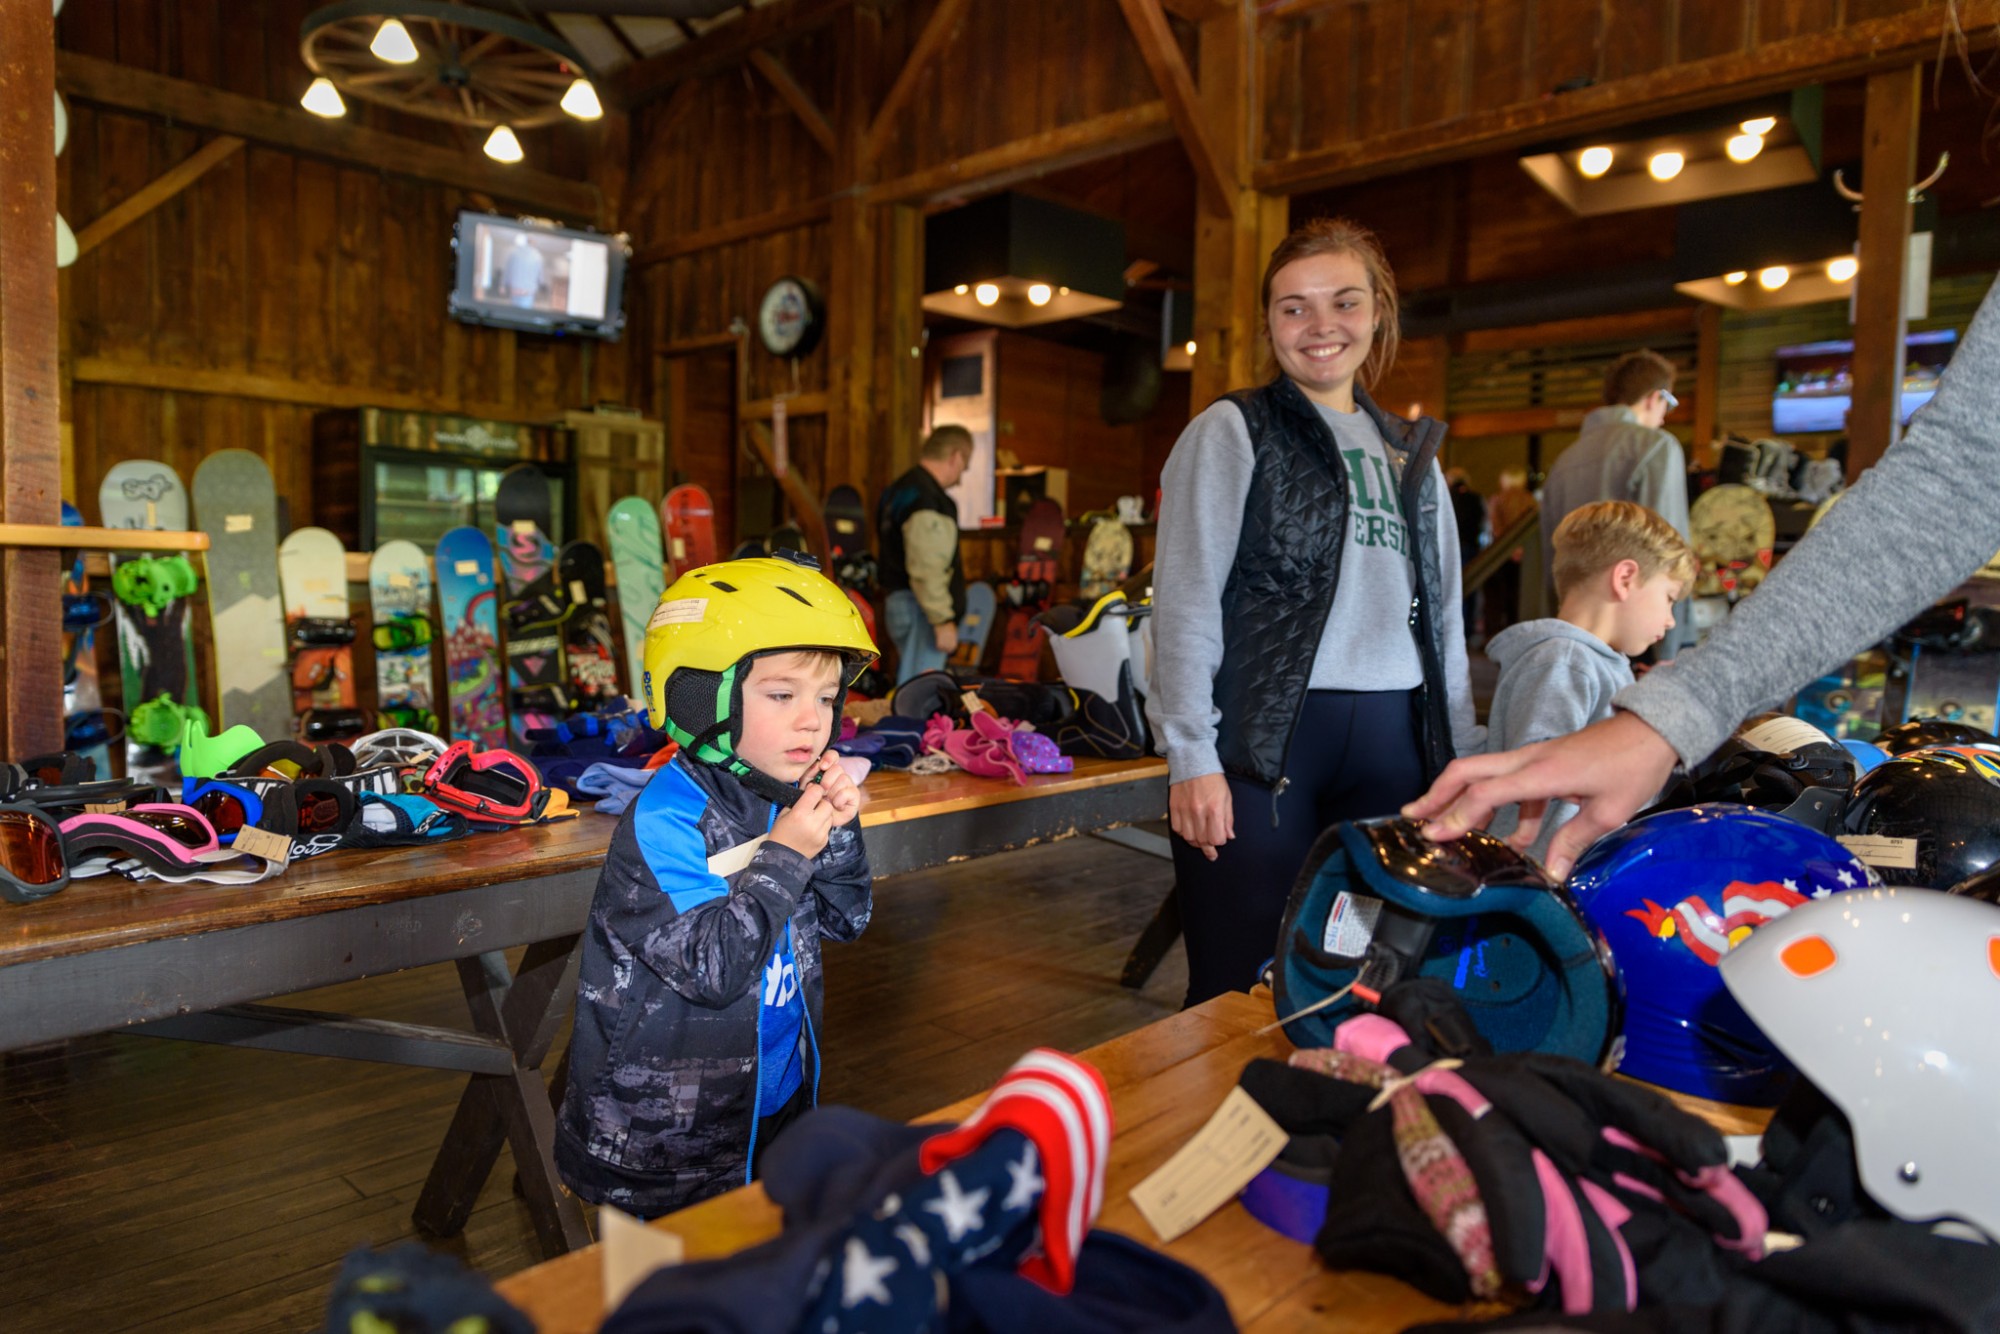 Cash for Your Ski and Snowboard Gear at Snow Trails